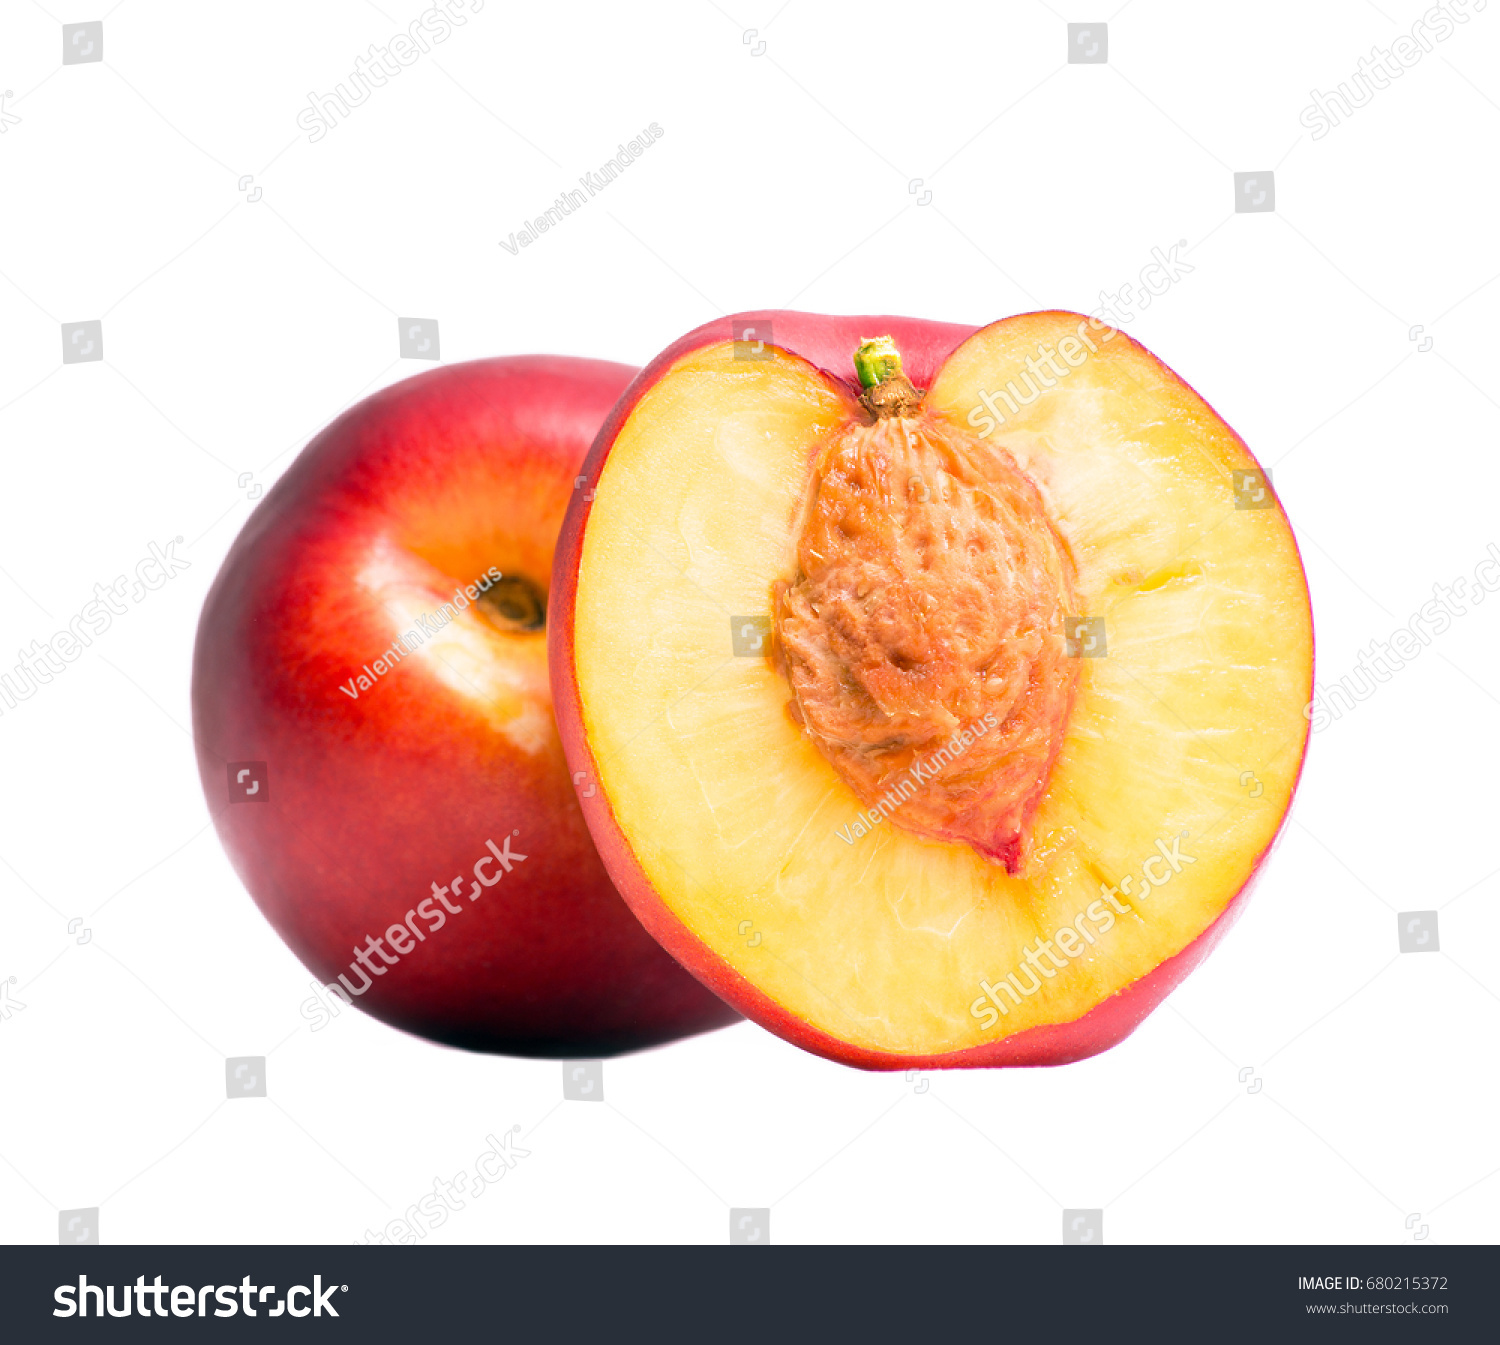 Nectarine whole and half of nectarine with a stone. Isolated nectarines on a white background. Summer juicy fruit. Healthy food. Bright juicy colors. #680215372